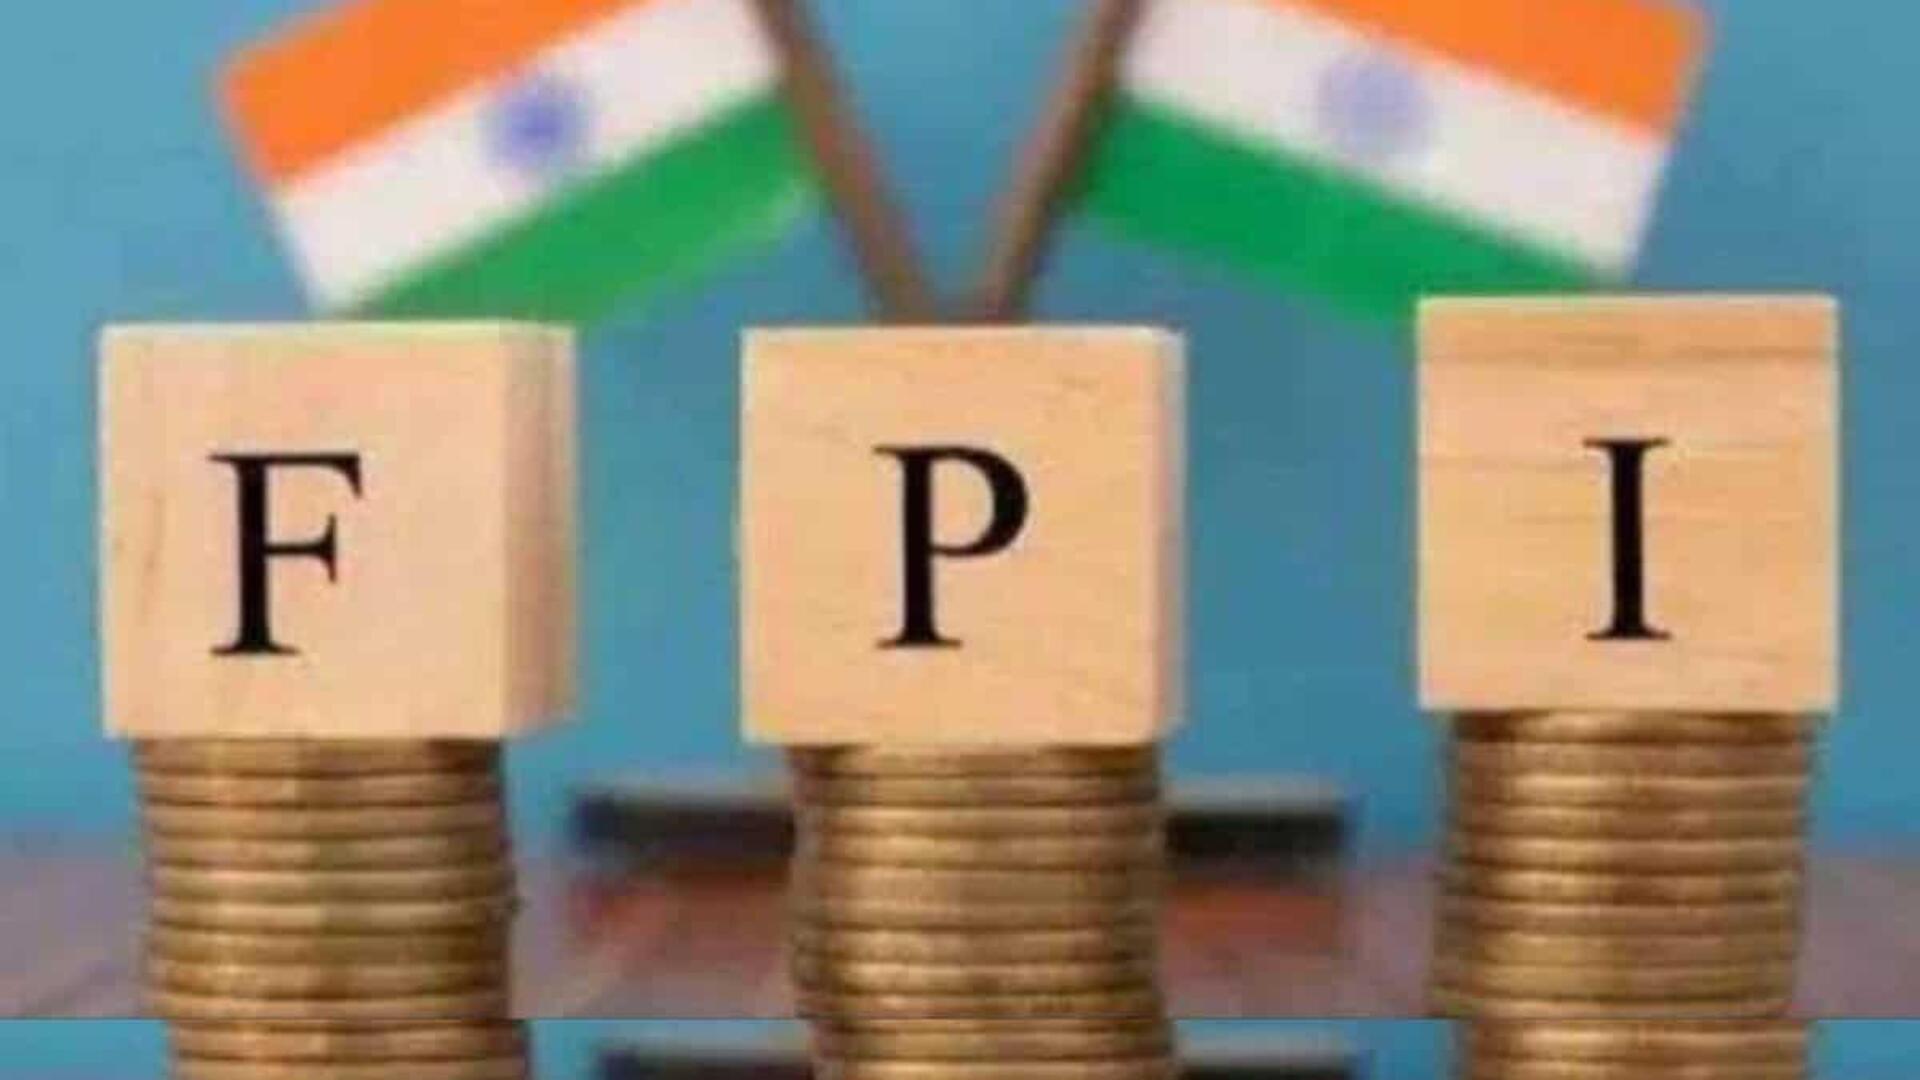 P-note investment reaches 7-year peak in India: Here's why